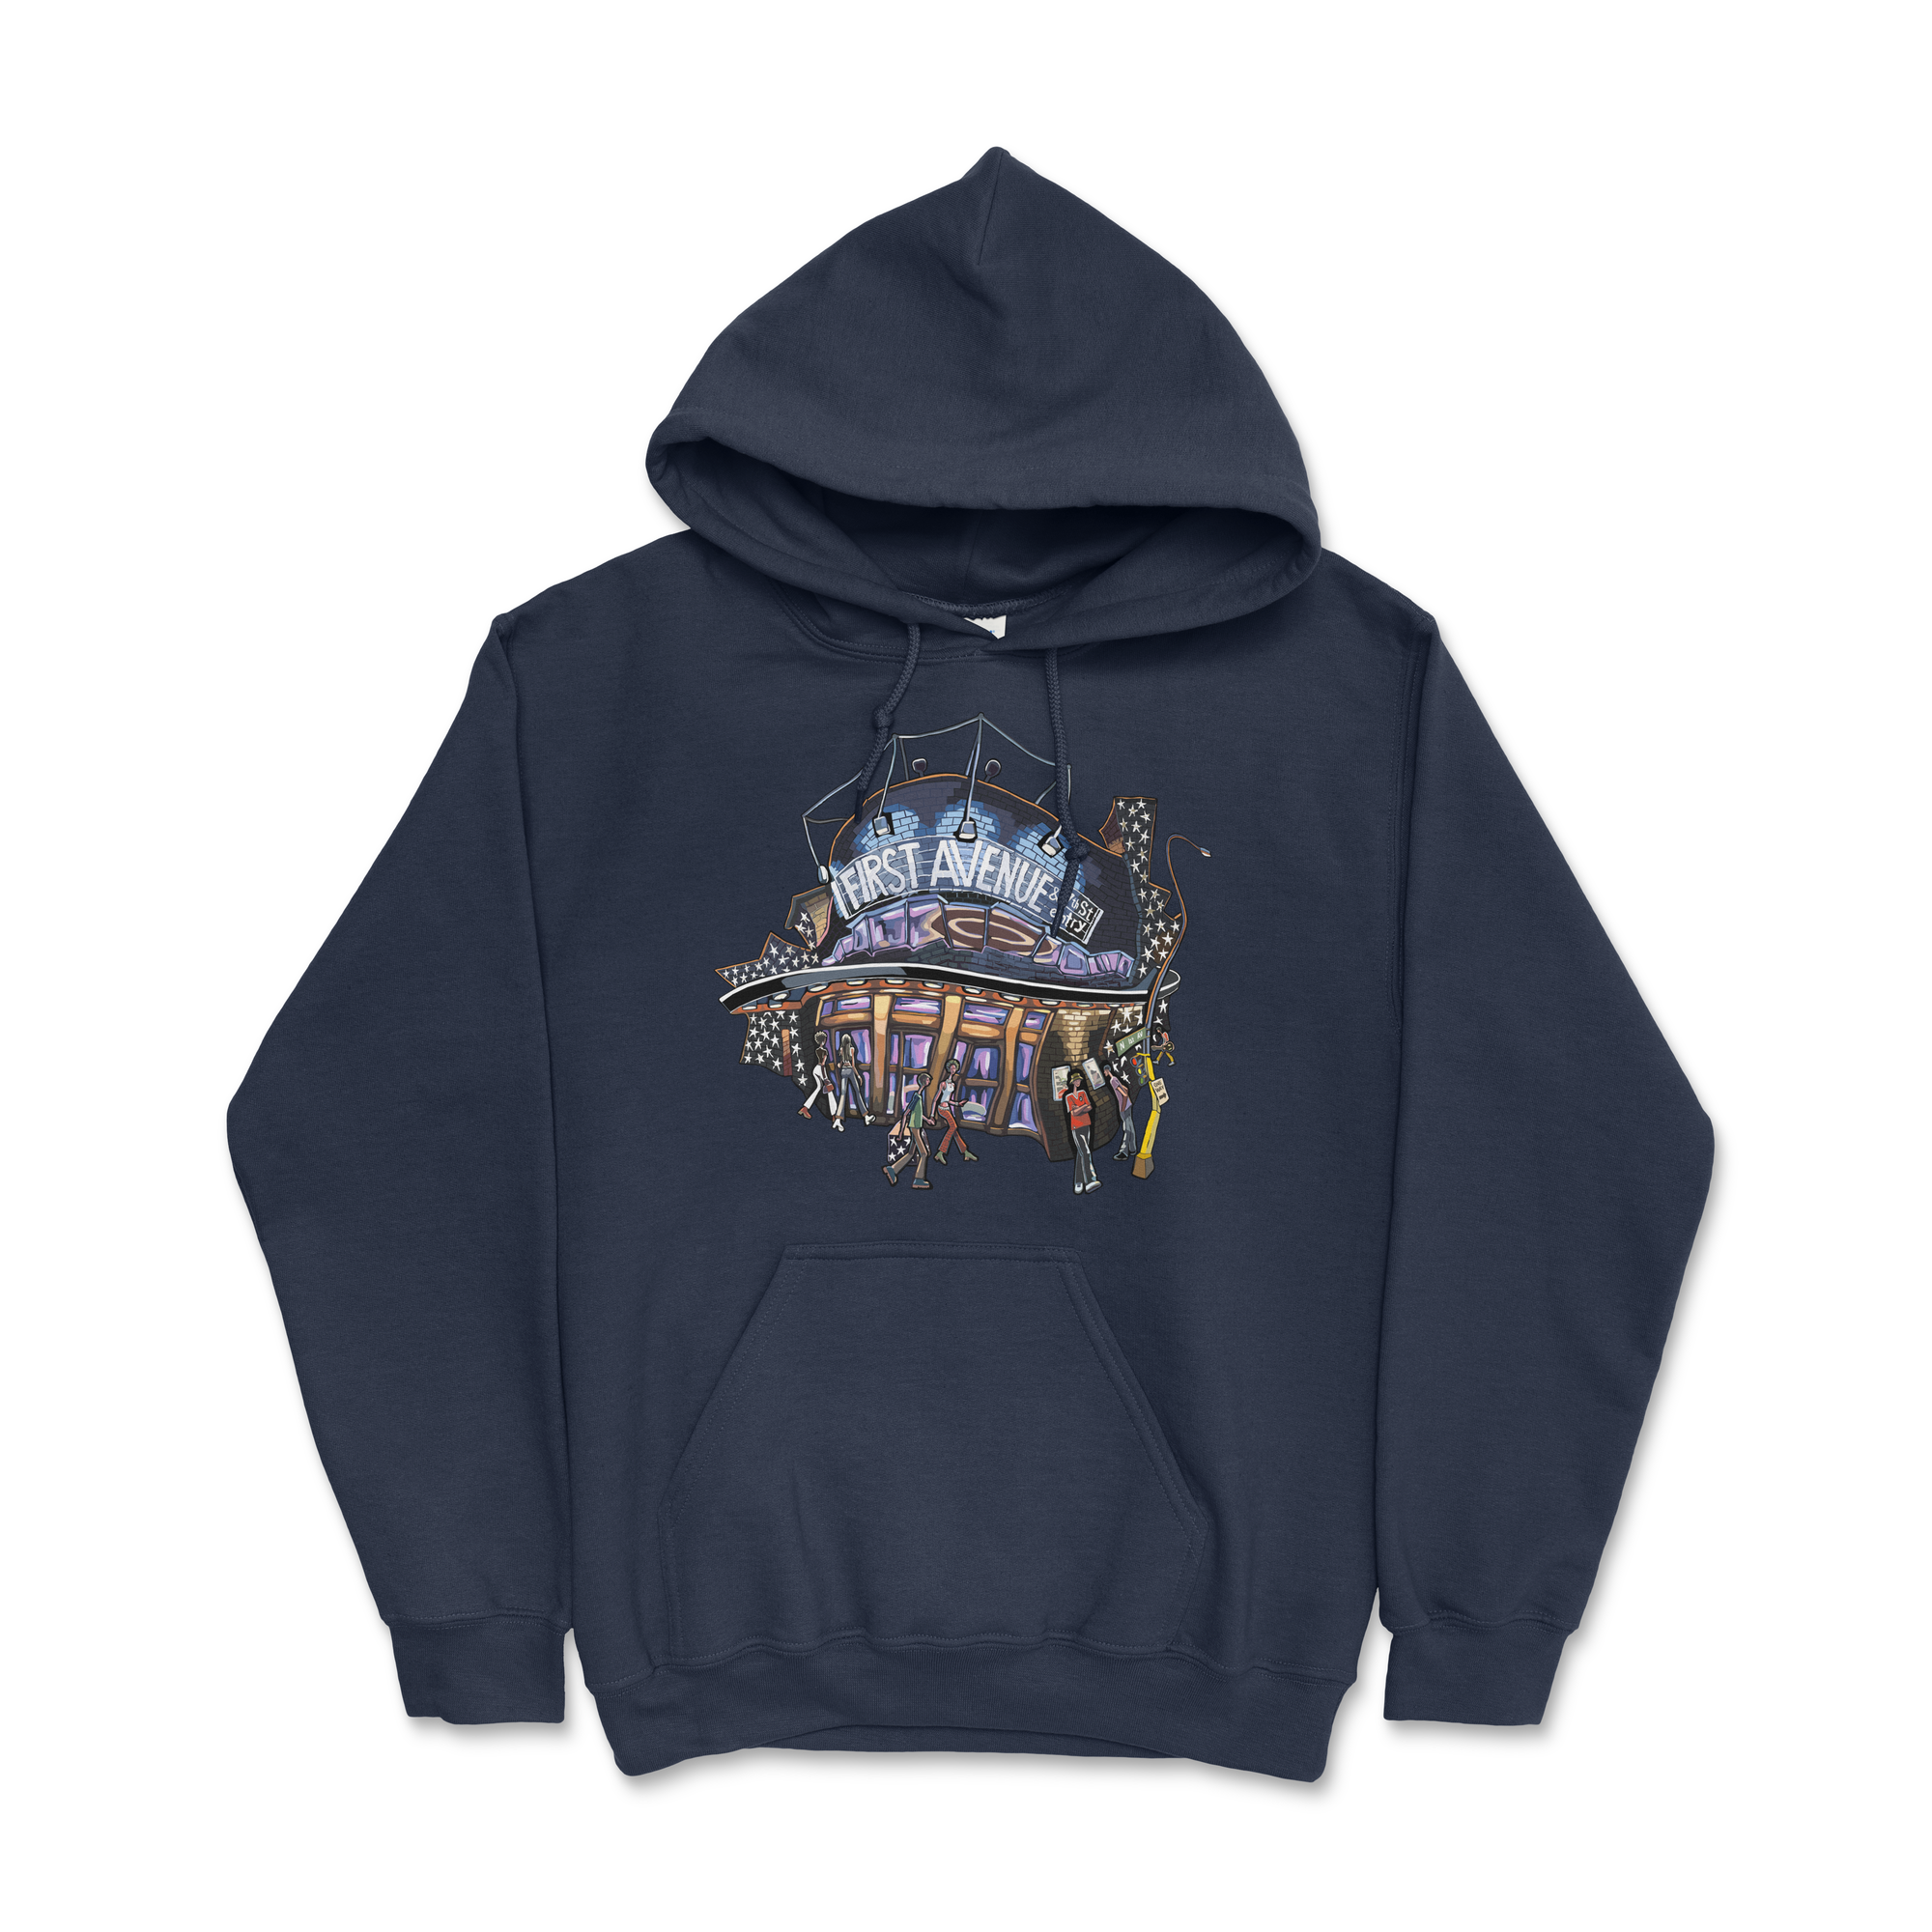 "First Ave" Hoodie